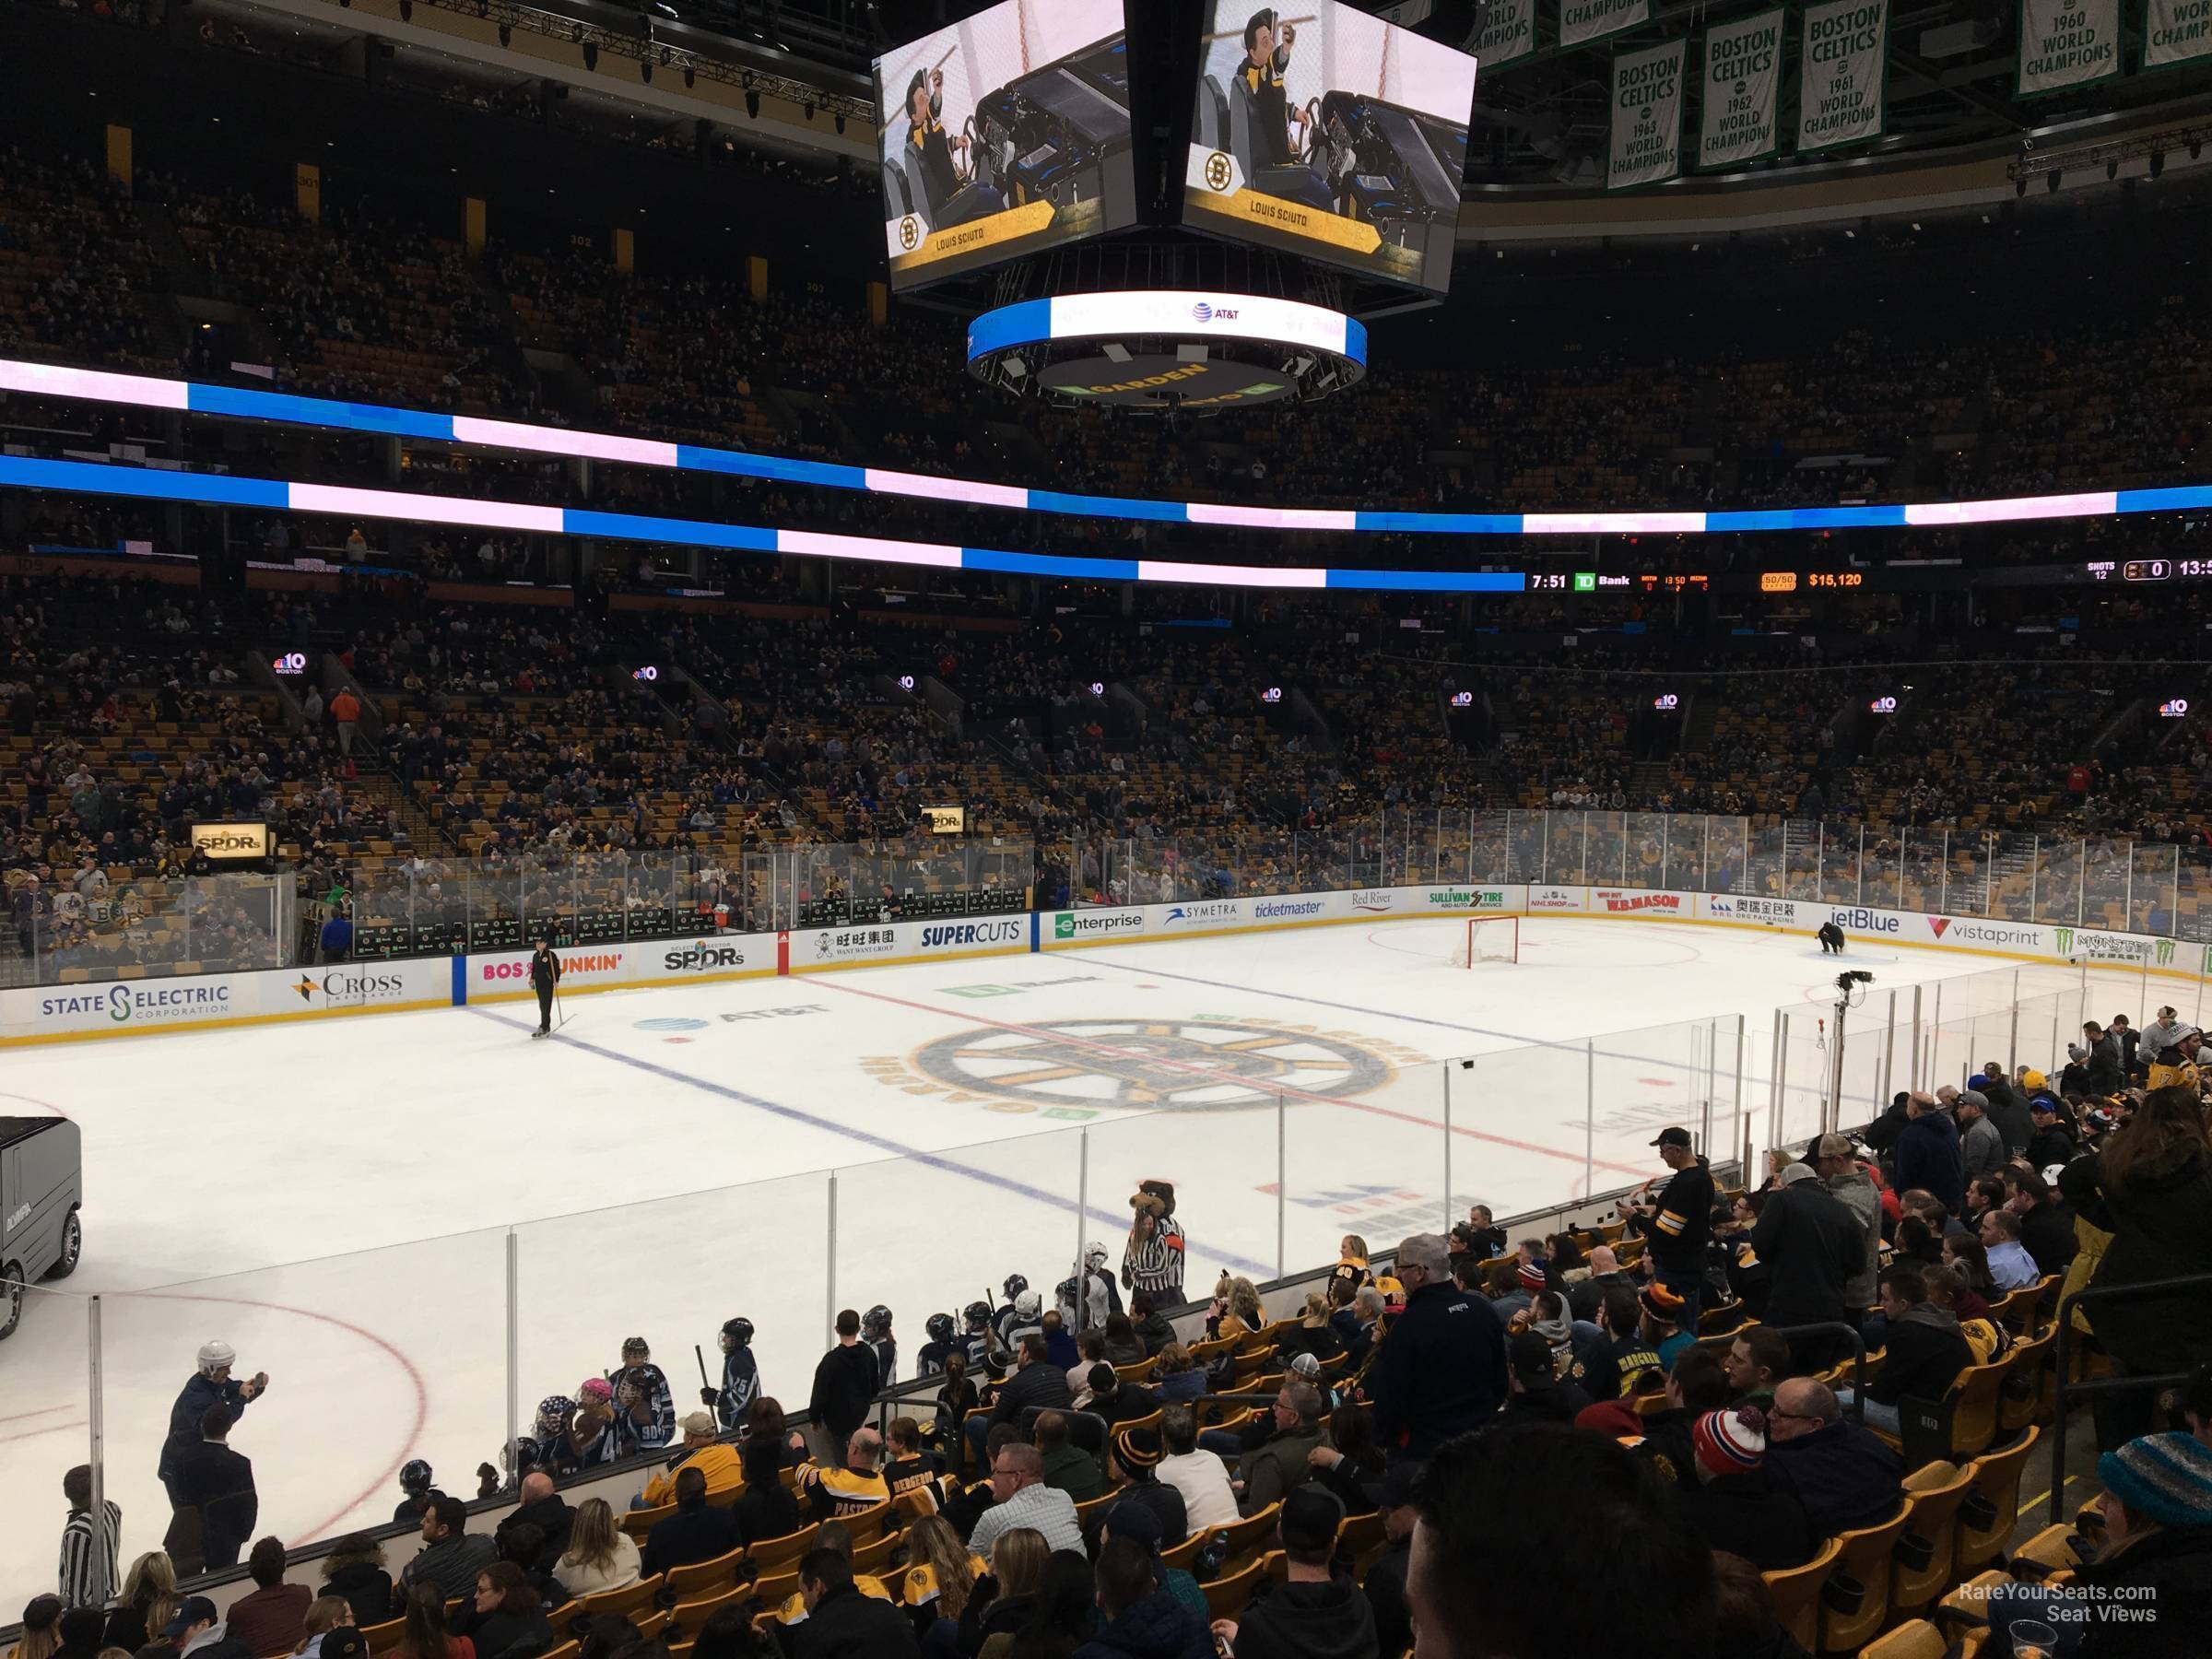 loge 14, row 15 seat view  for hockey - td garden